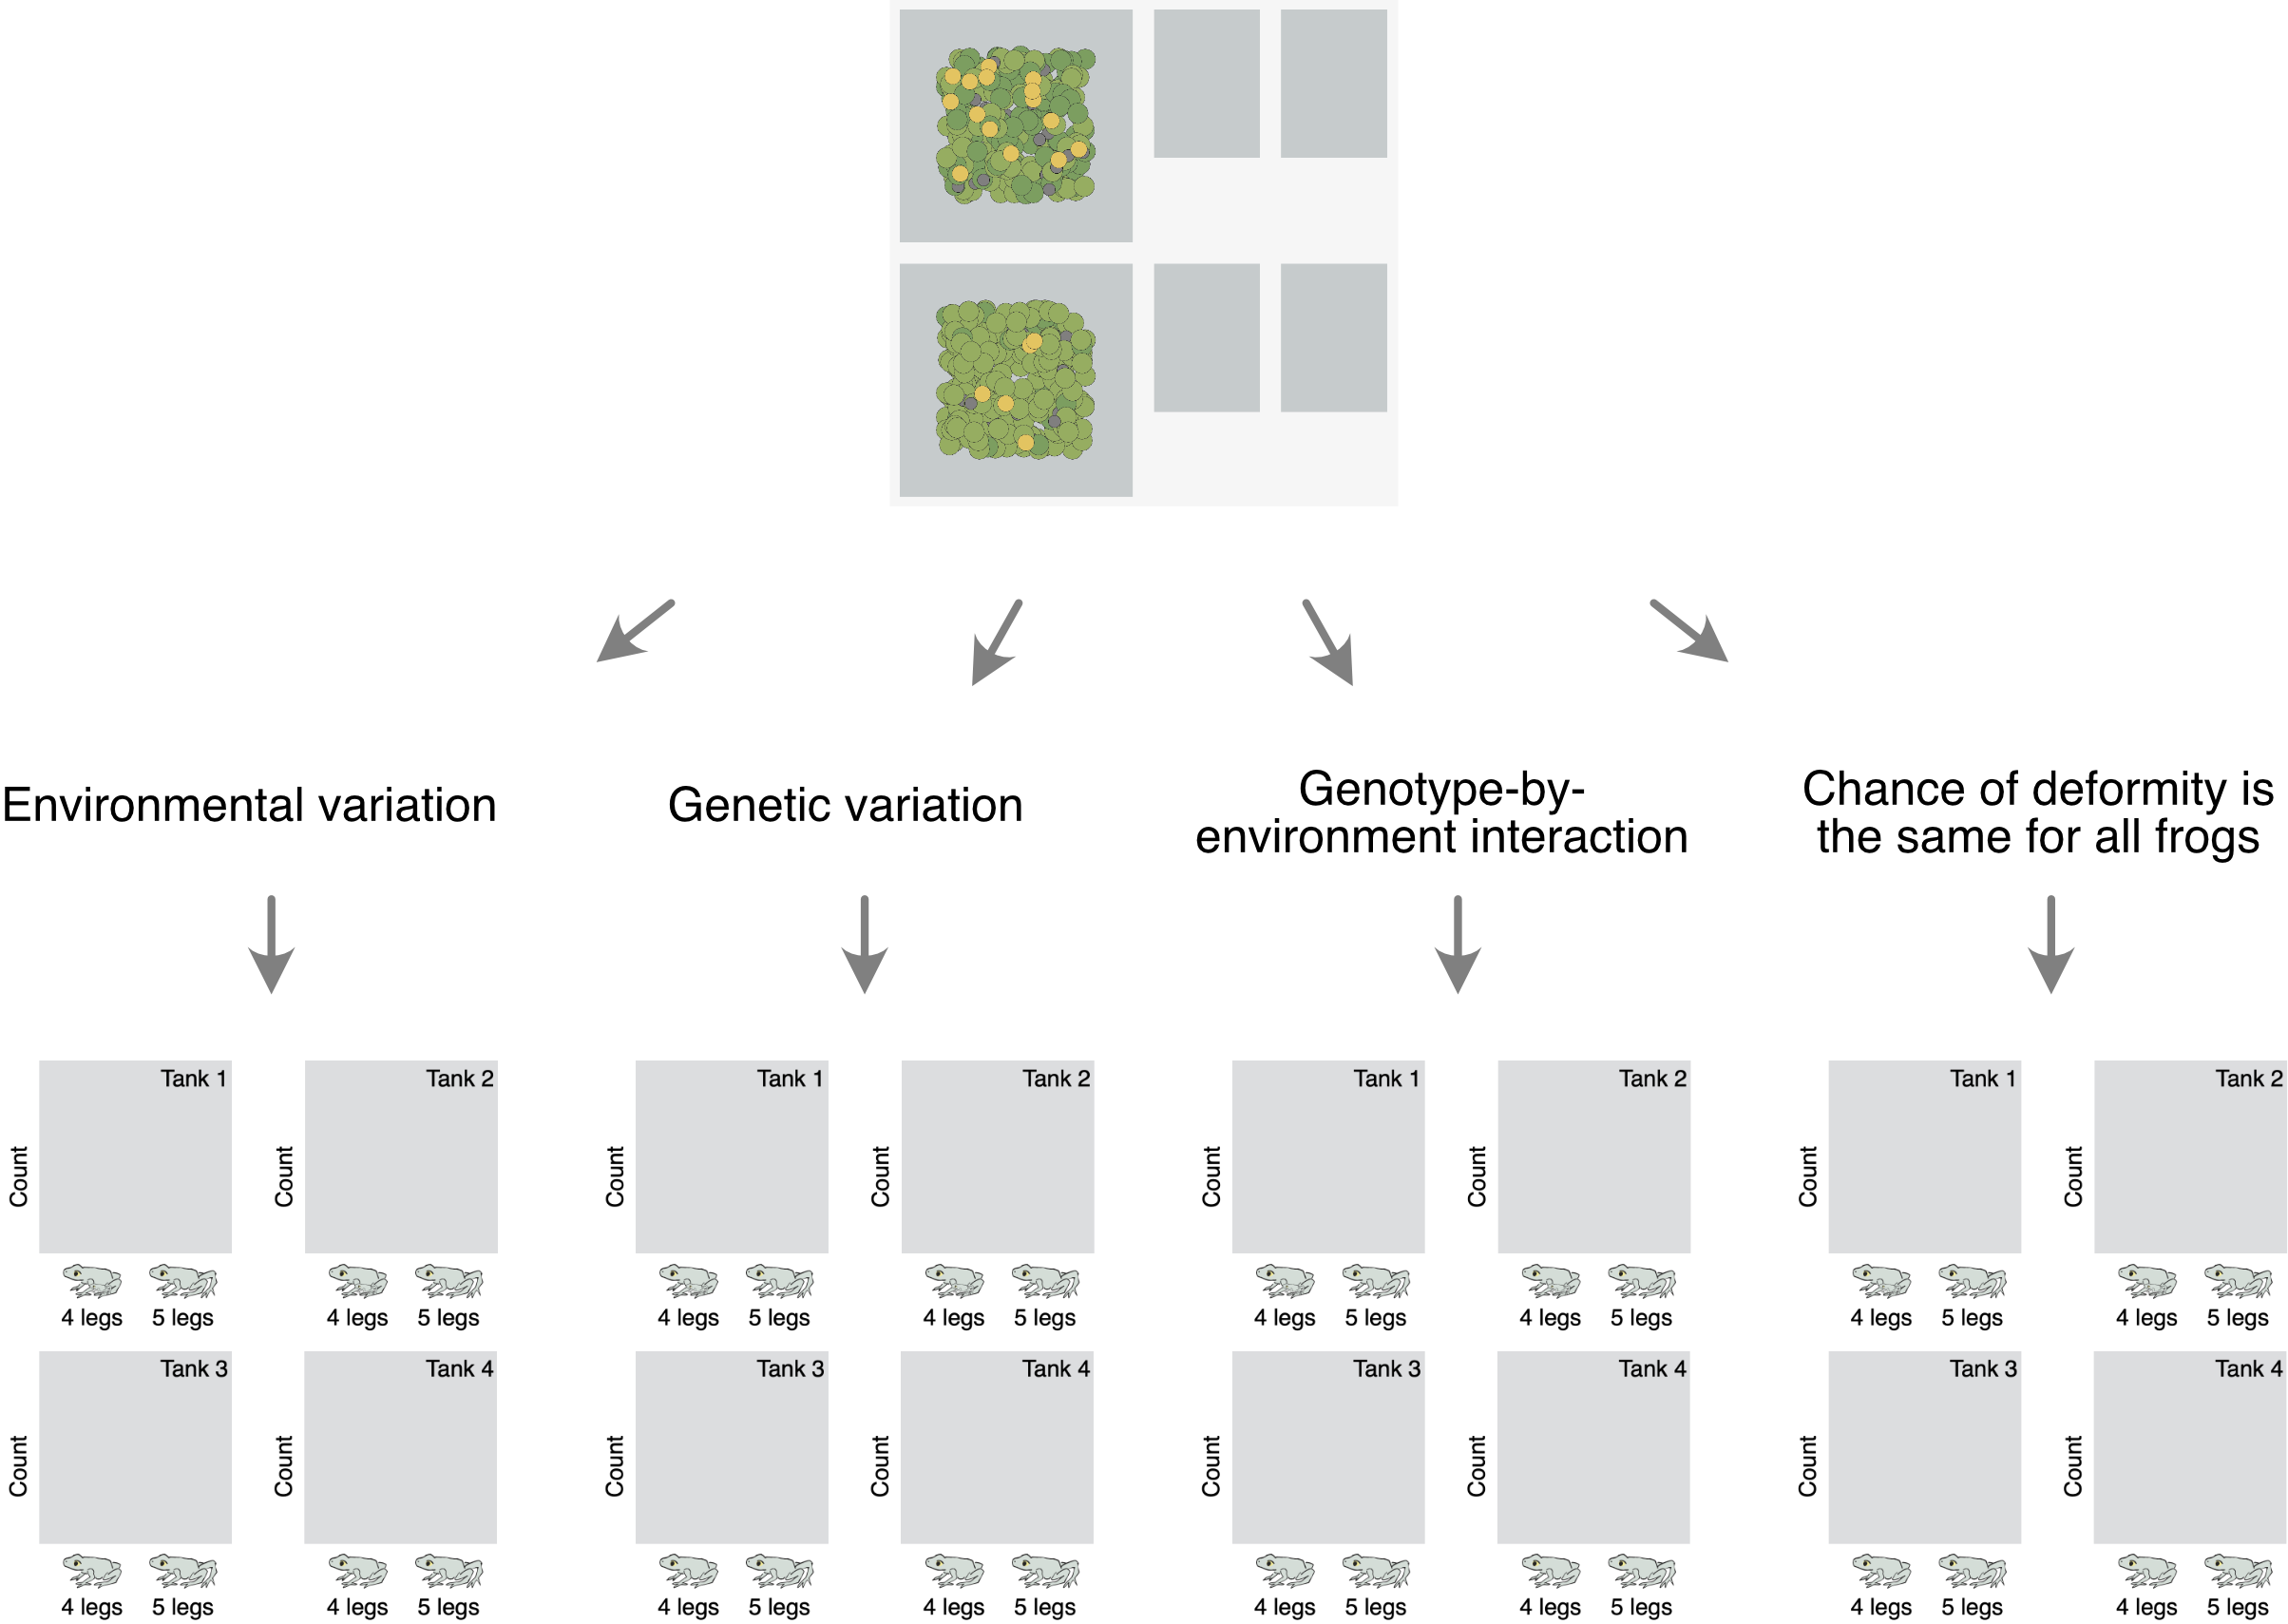 Flow chart. At the top is a screenshot from the FrogPond application, showing Top and Bottom Ponds as well as Tanks 1-4. Below the screenshot are four arrows, pointing to labels that read, from left to right, Environmental Variation, Genetic Variation, Genotype-by-Environment Interaction, and Chance of deformity is the same for all frogs. Below each of the four labels an arrow points to a set of four graphs in a two-by-two arrangement. The graphs in the top row are labeled Tank 1 and Tank 2. The graphs in the bottom row are labeled Tank 3 and Tank 4. The vertical axis for each graph is Count. The horizontal axis has two categories: 4 legs and 5 legs, each illustrated with a cartoon frog.